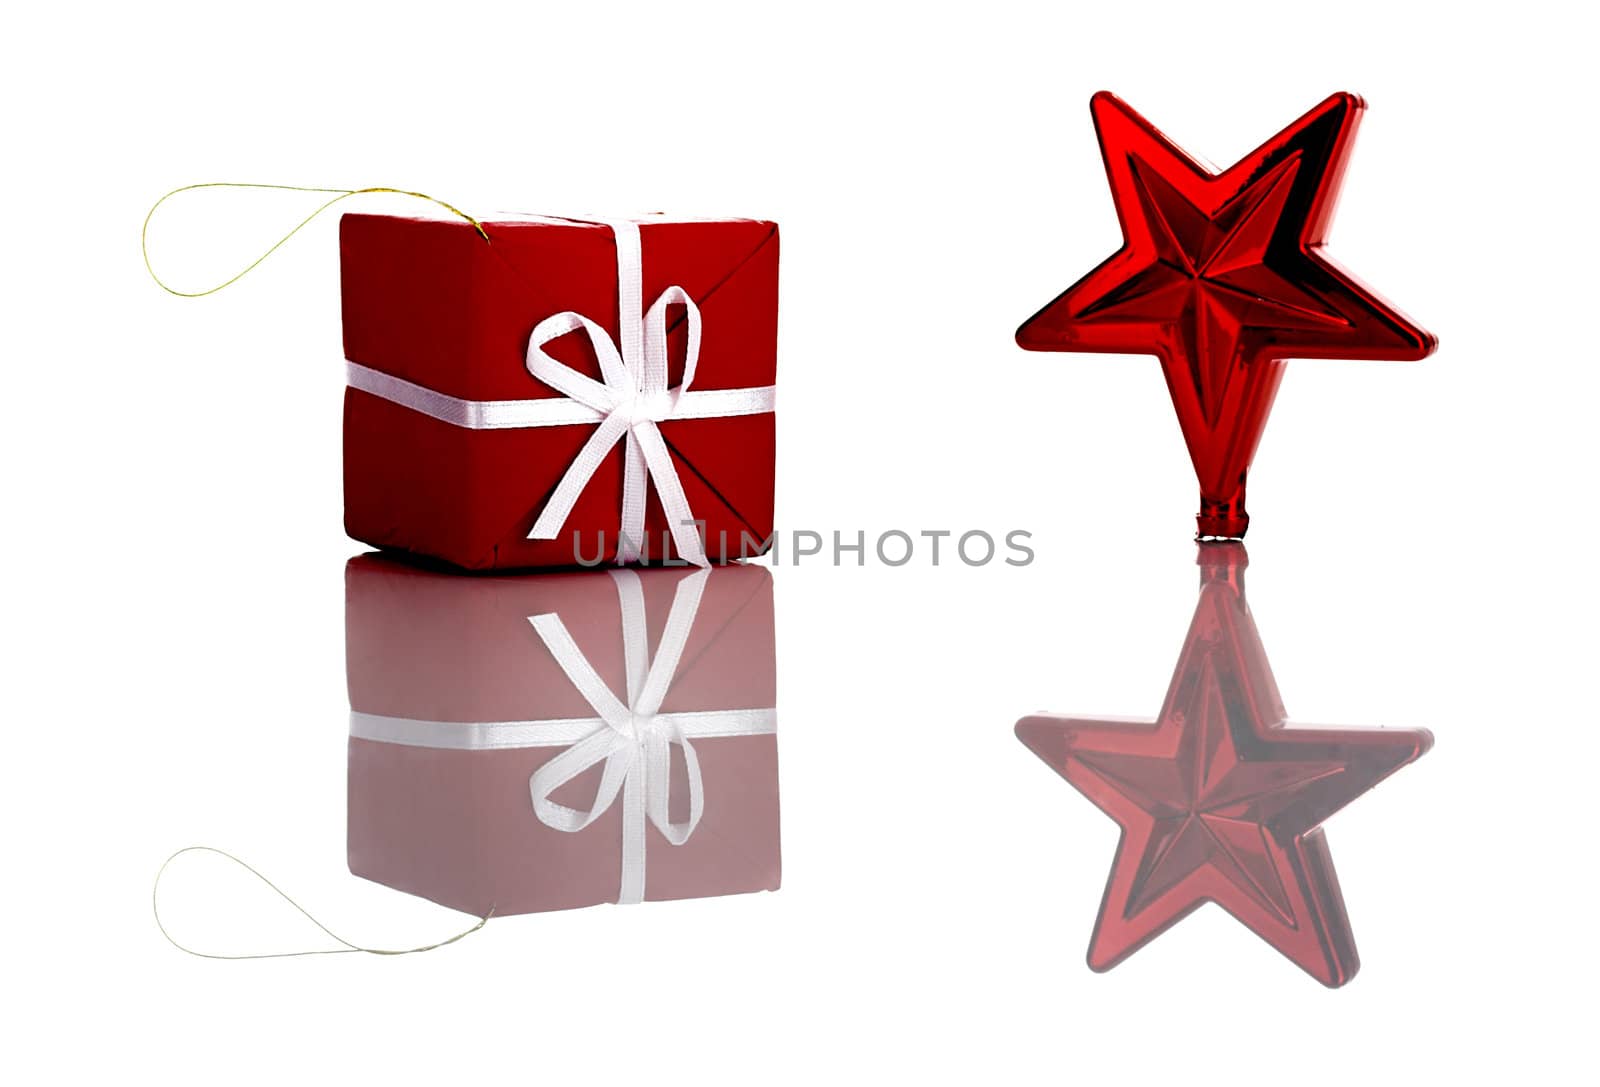 Red Christmas Ornaments by Iko